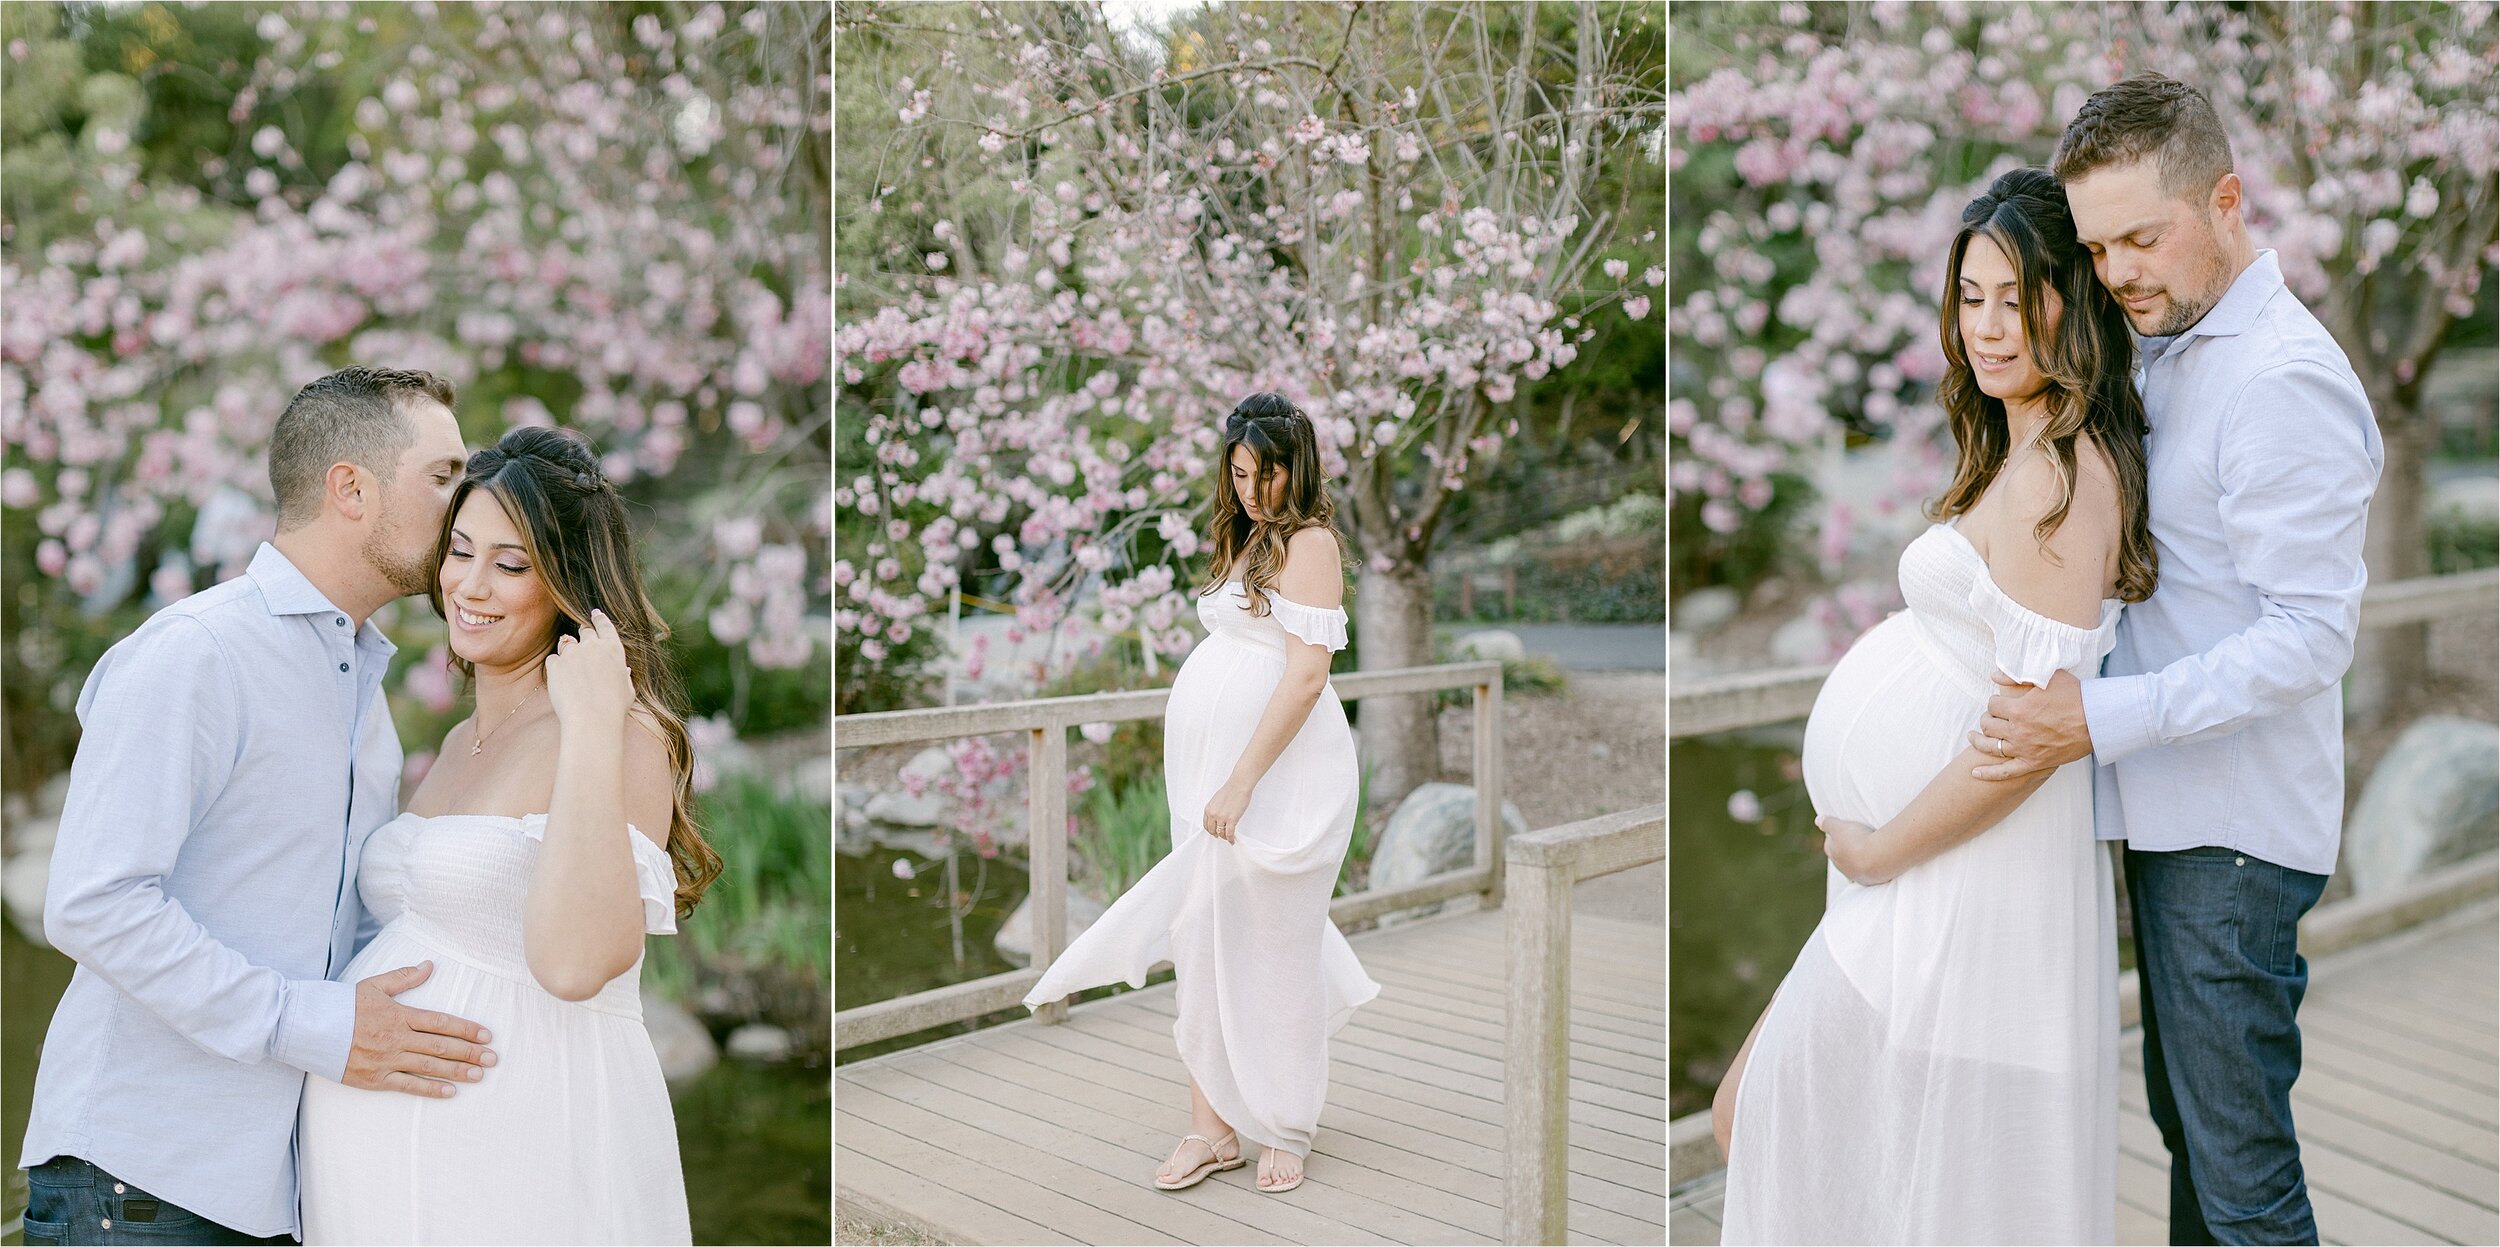 Brunette woman in white flowy dress poses with her husband wearing jeans and a pale blue button down while taking their maternity photos in the gardens at the LA Arboretum.